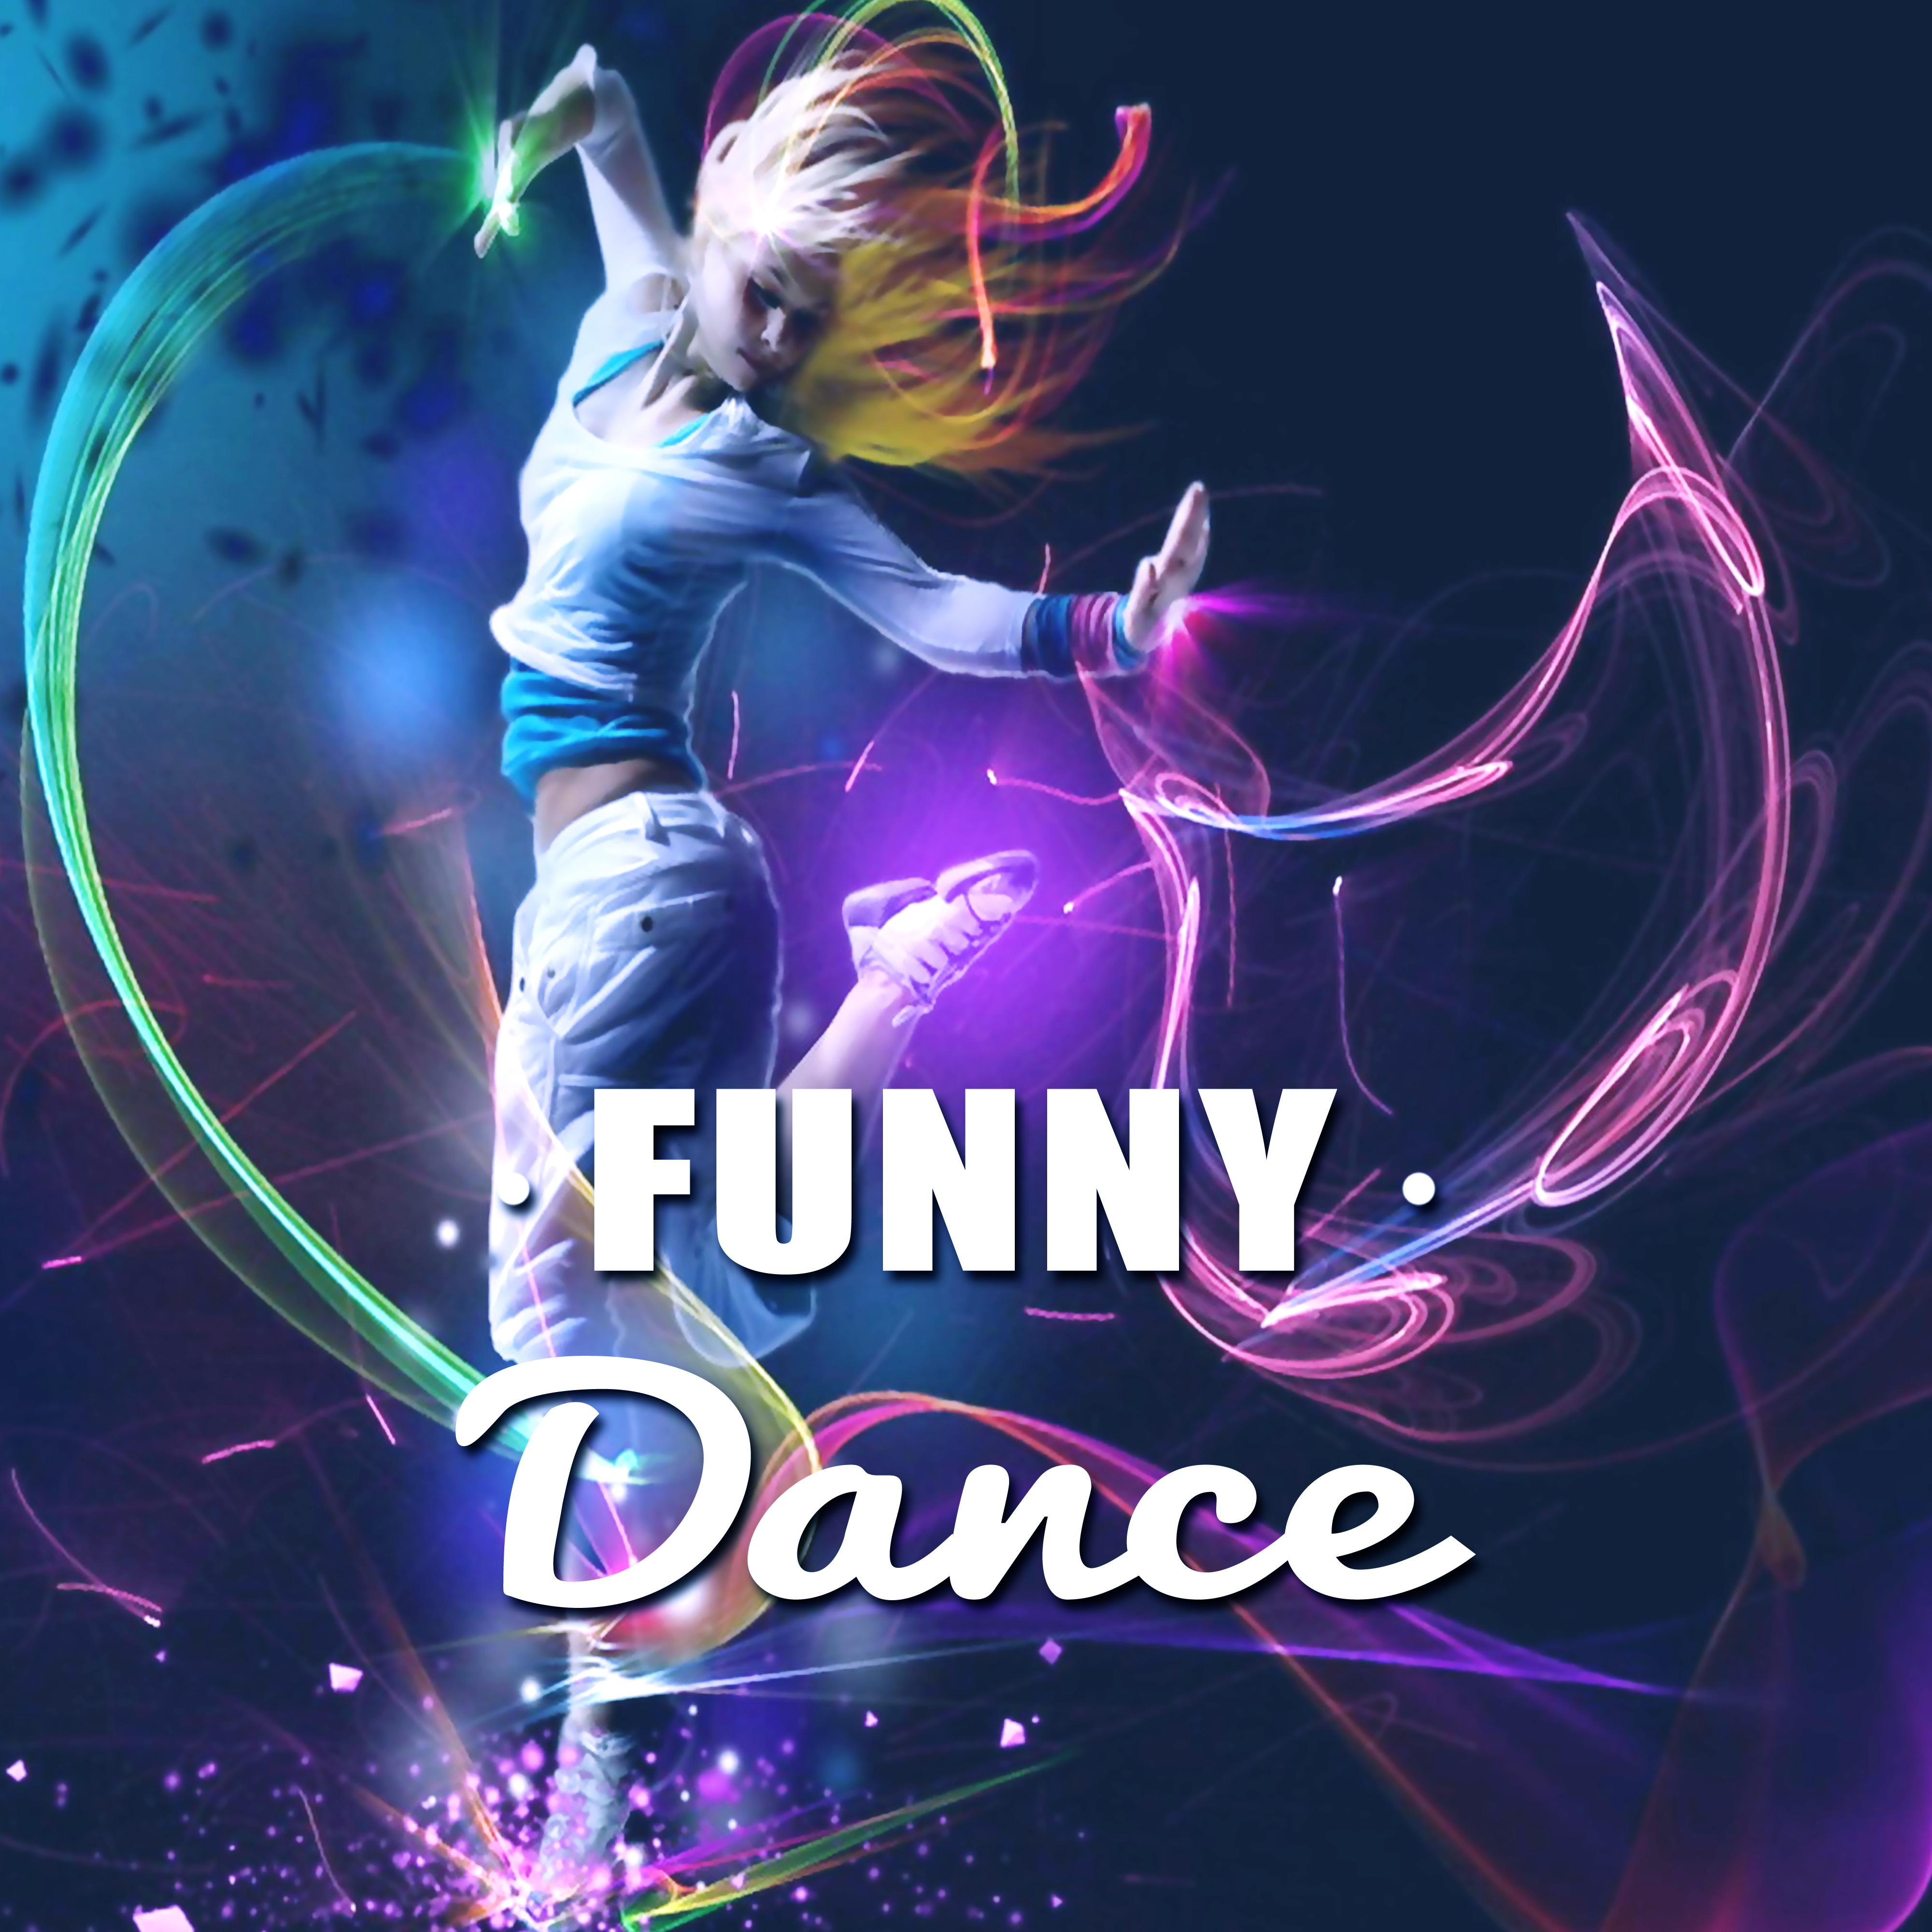 Funny Dance - Tropical Music, Island is Fun, Party with Drinks, Your Holidays, My Memories